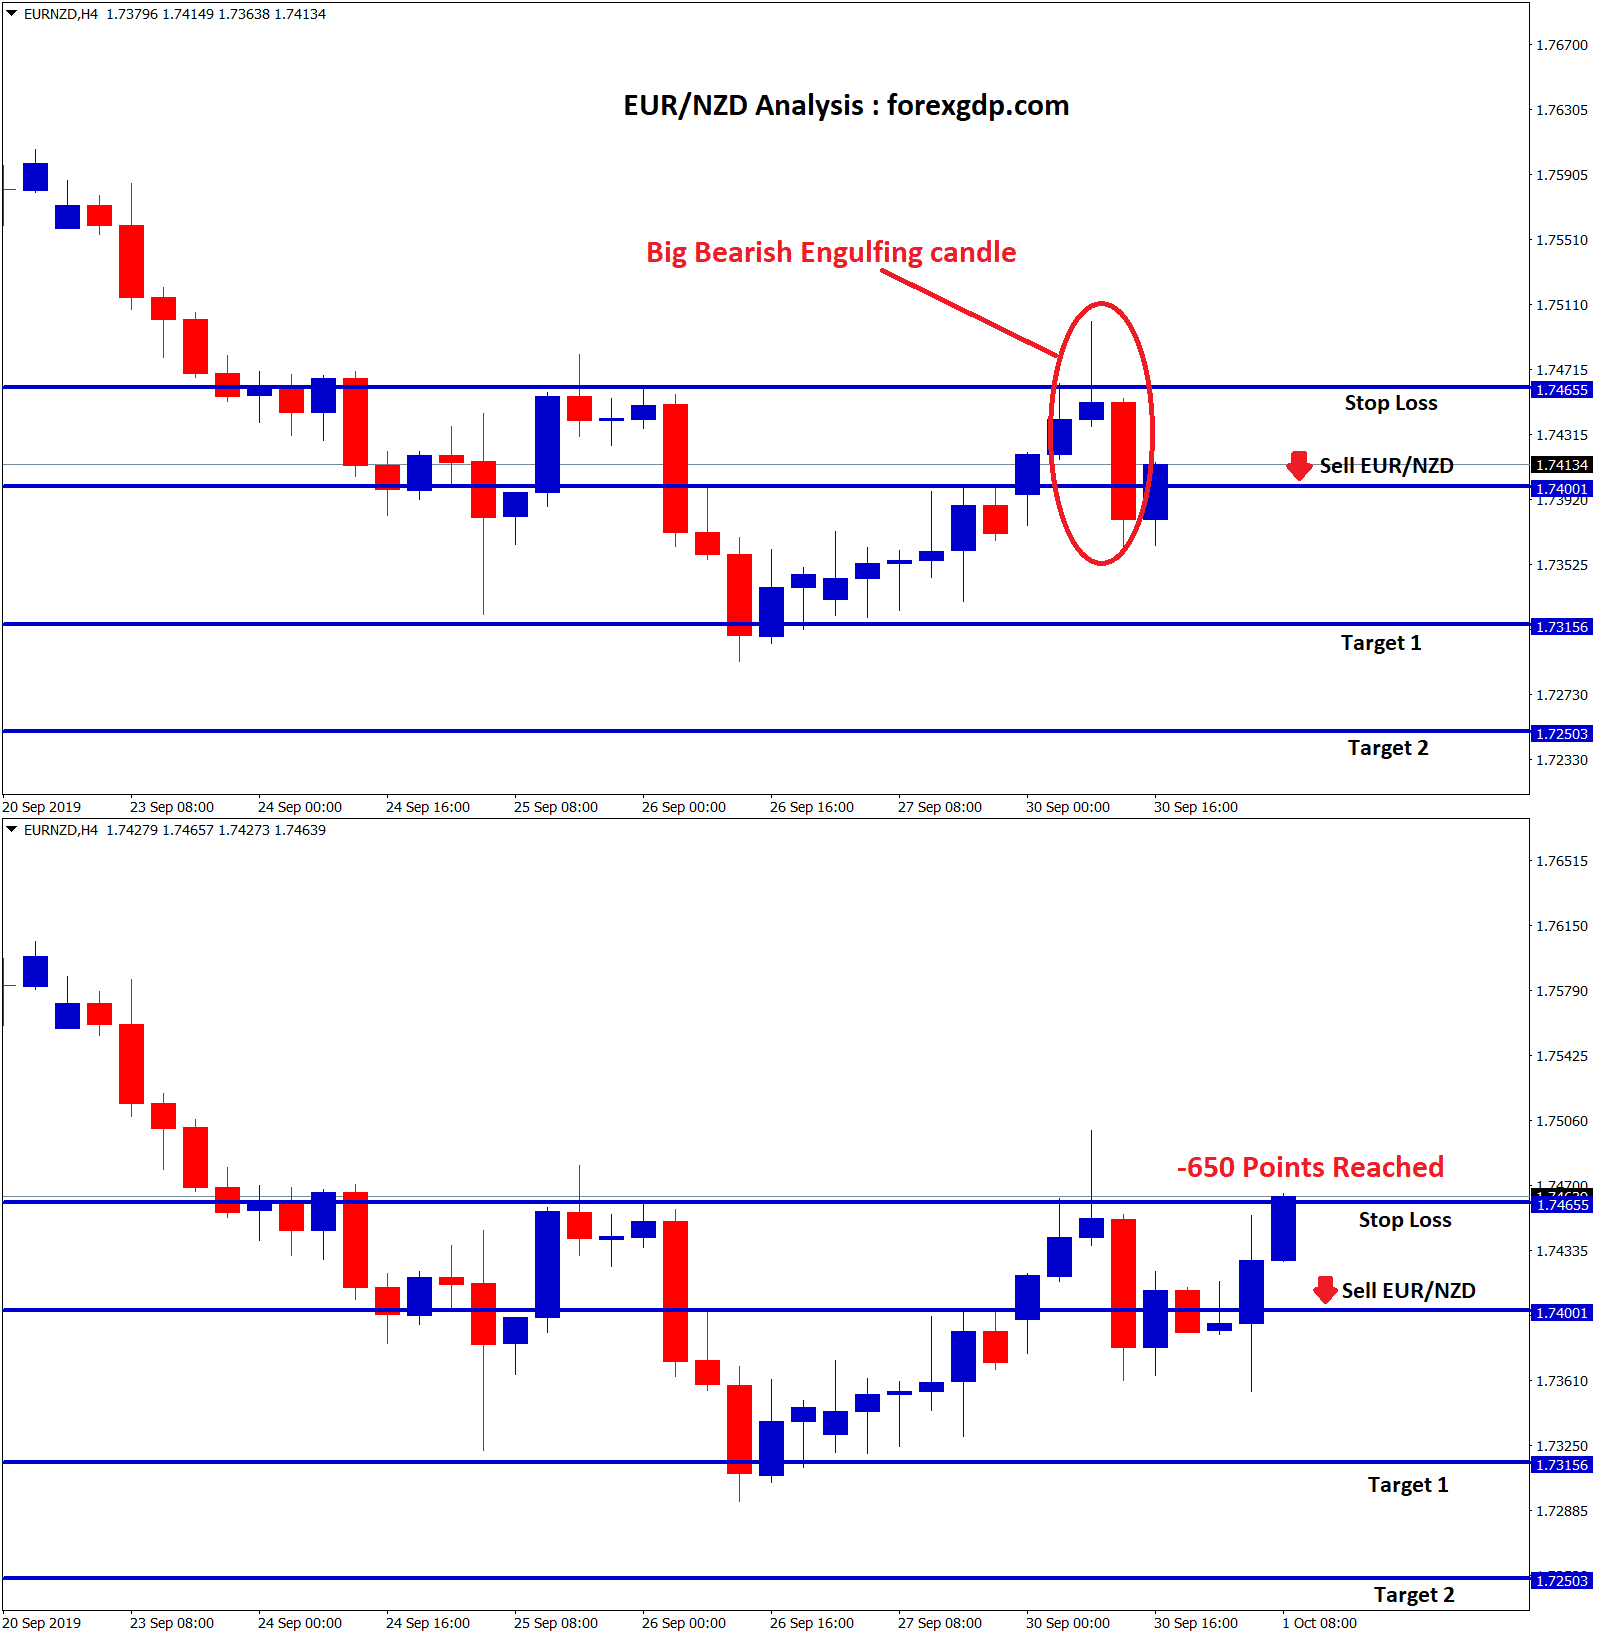 Stop loss reached with -650 points in eur nzd sell signal